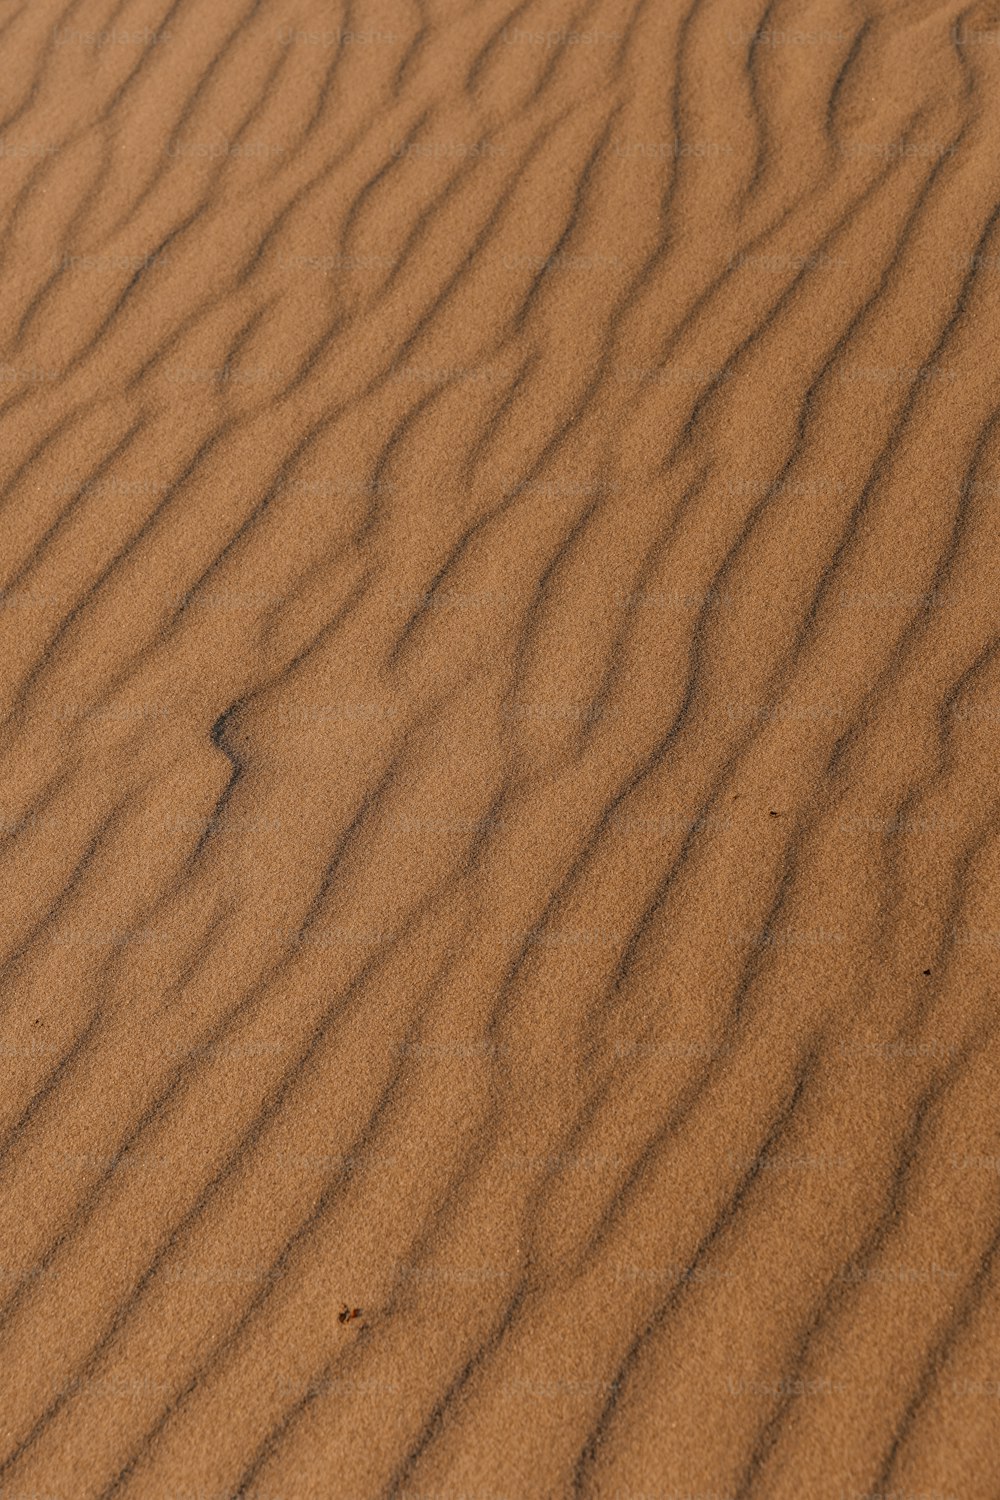 a sand dune with a small patch of grass growing out of it